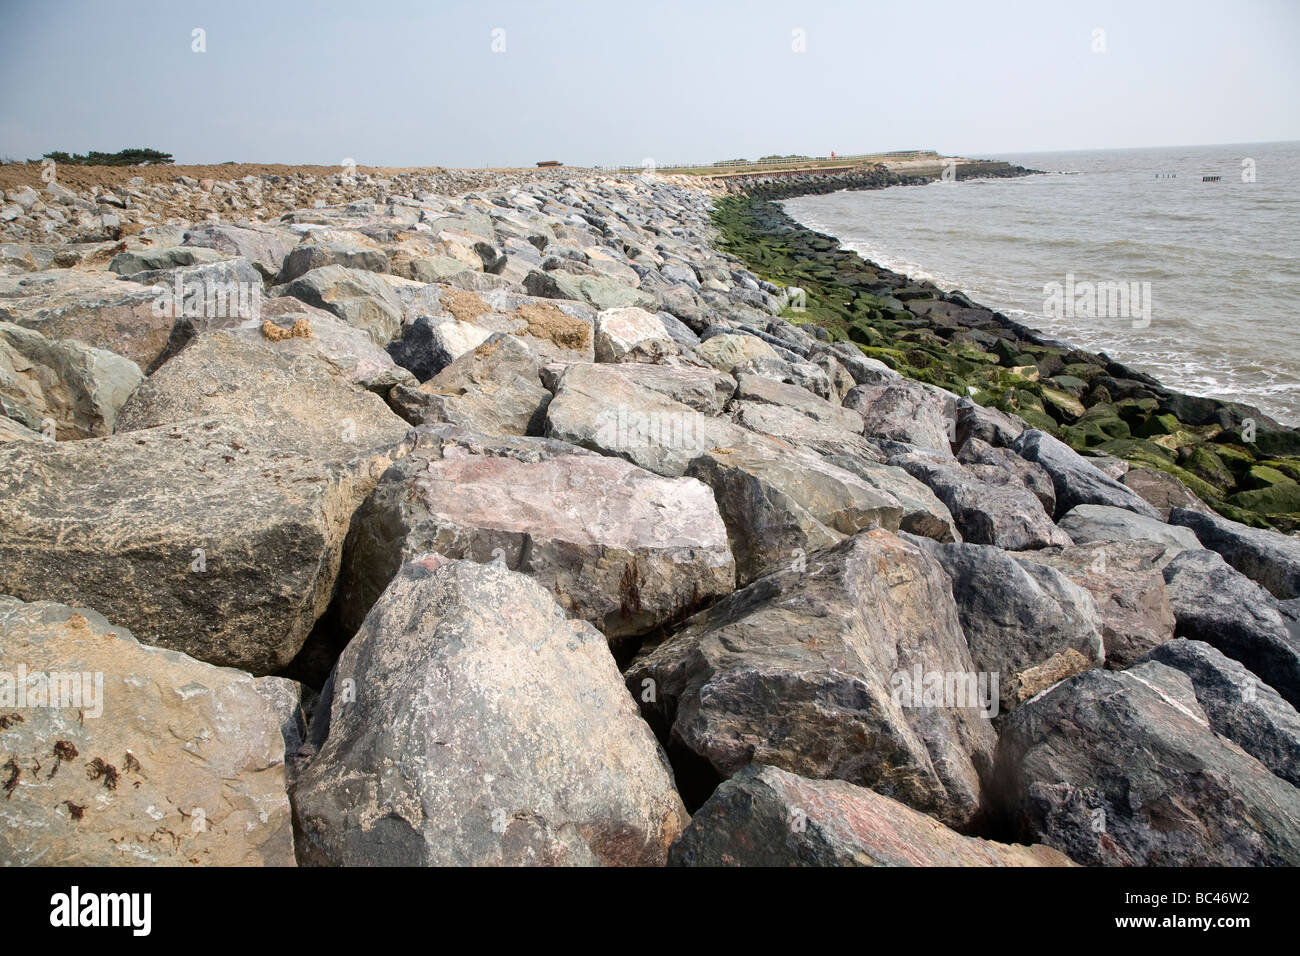 New rock armour sea defences East Lane Bawdsey Suffolk Stock Photo